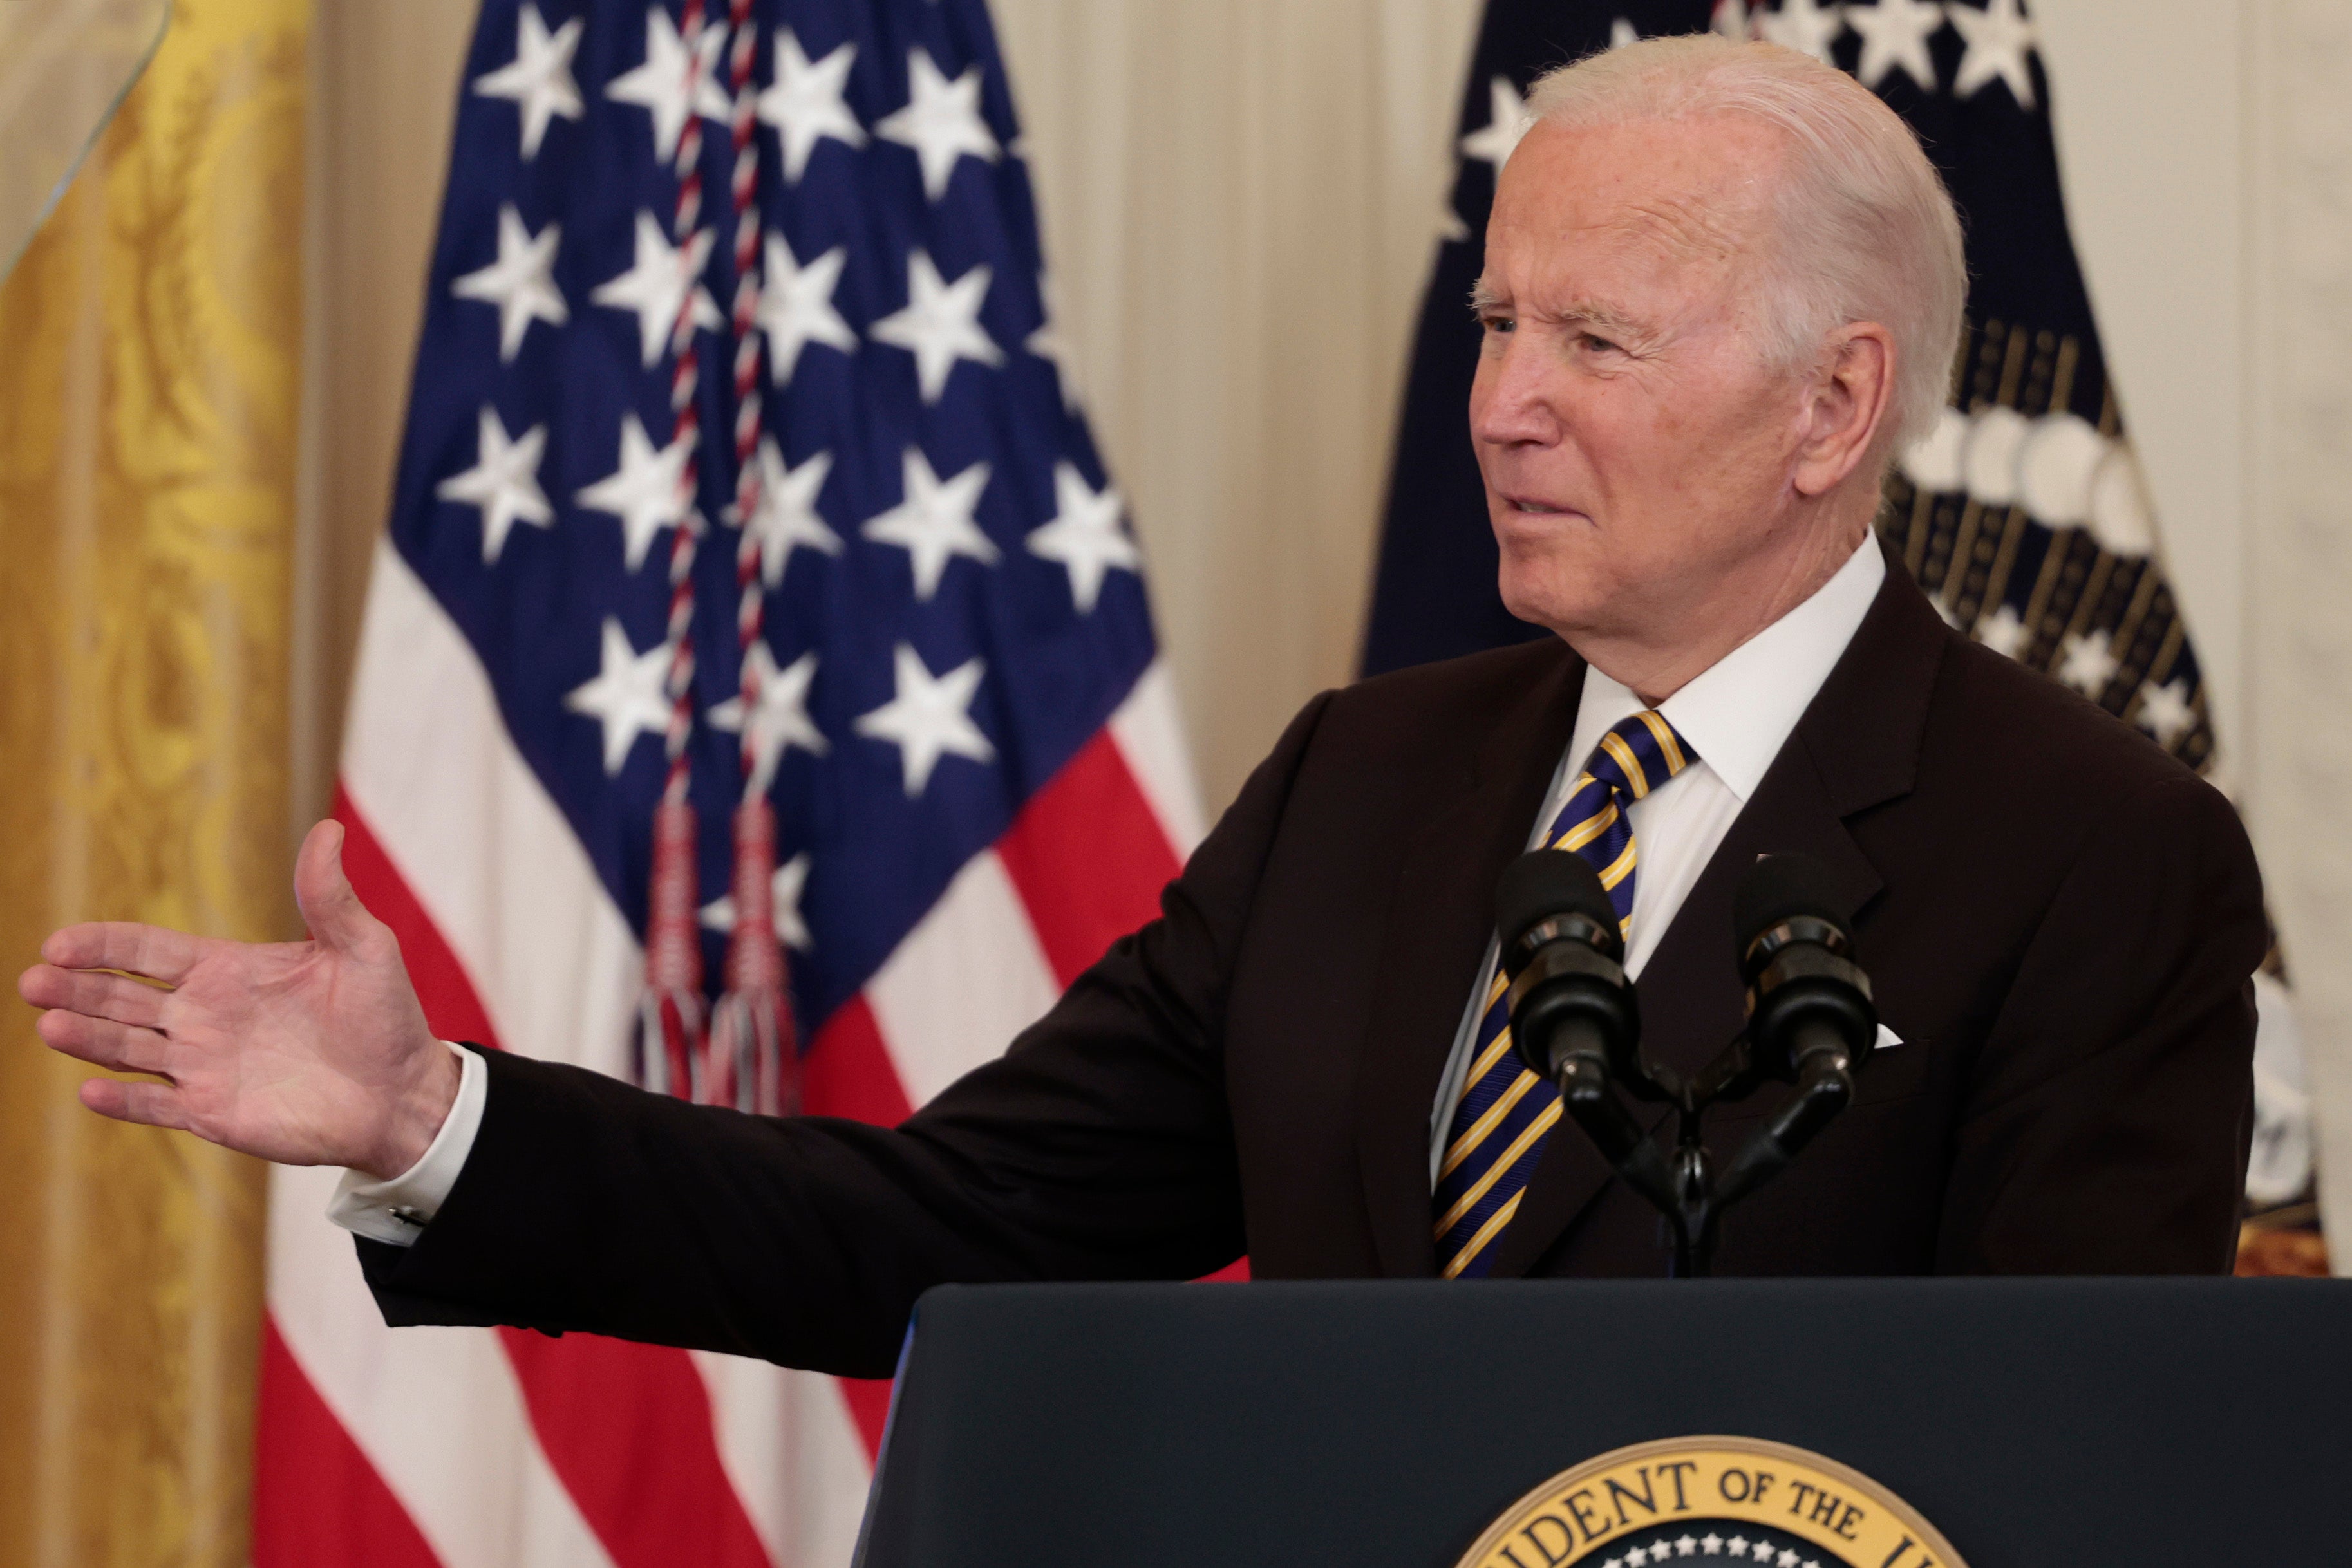 President Biden searched for positives as he announced the fall in GDP